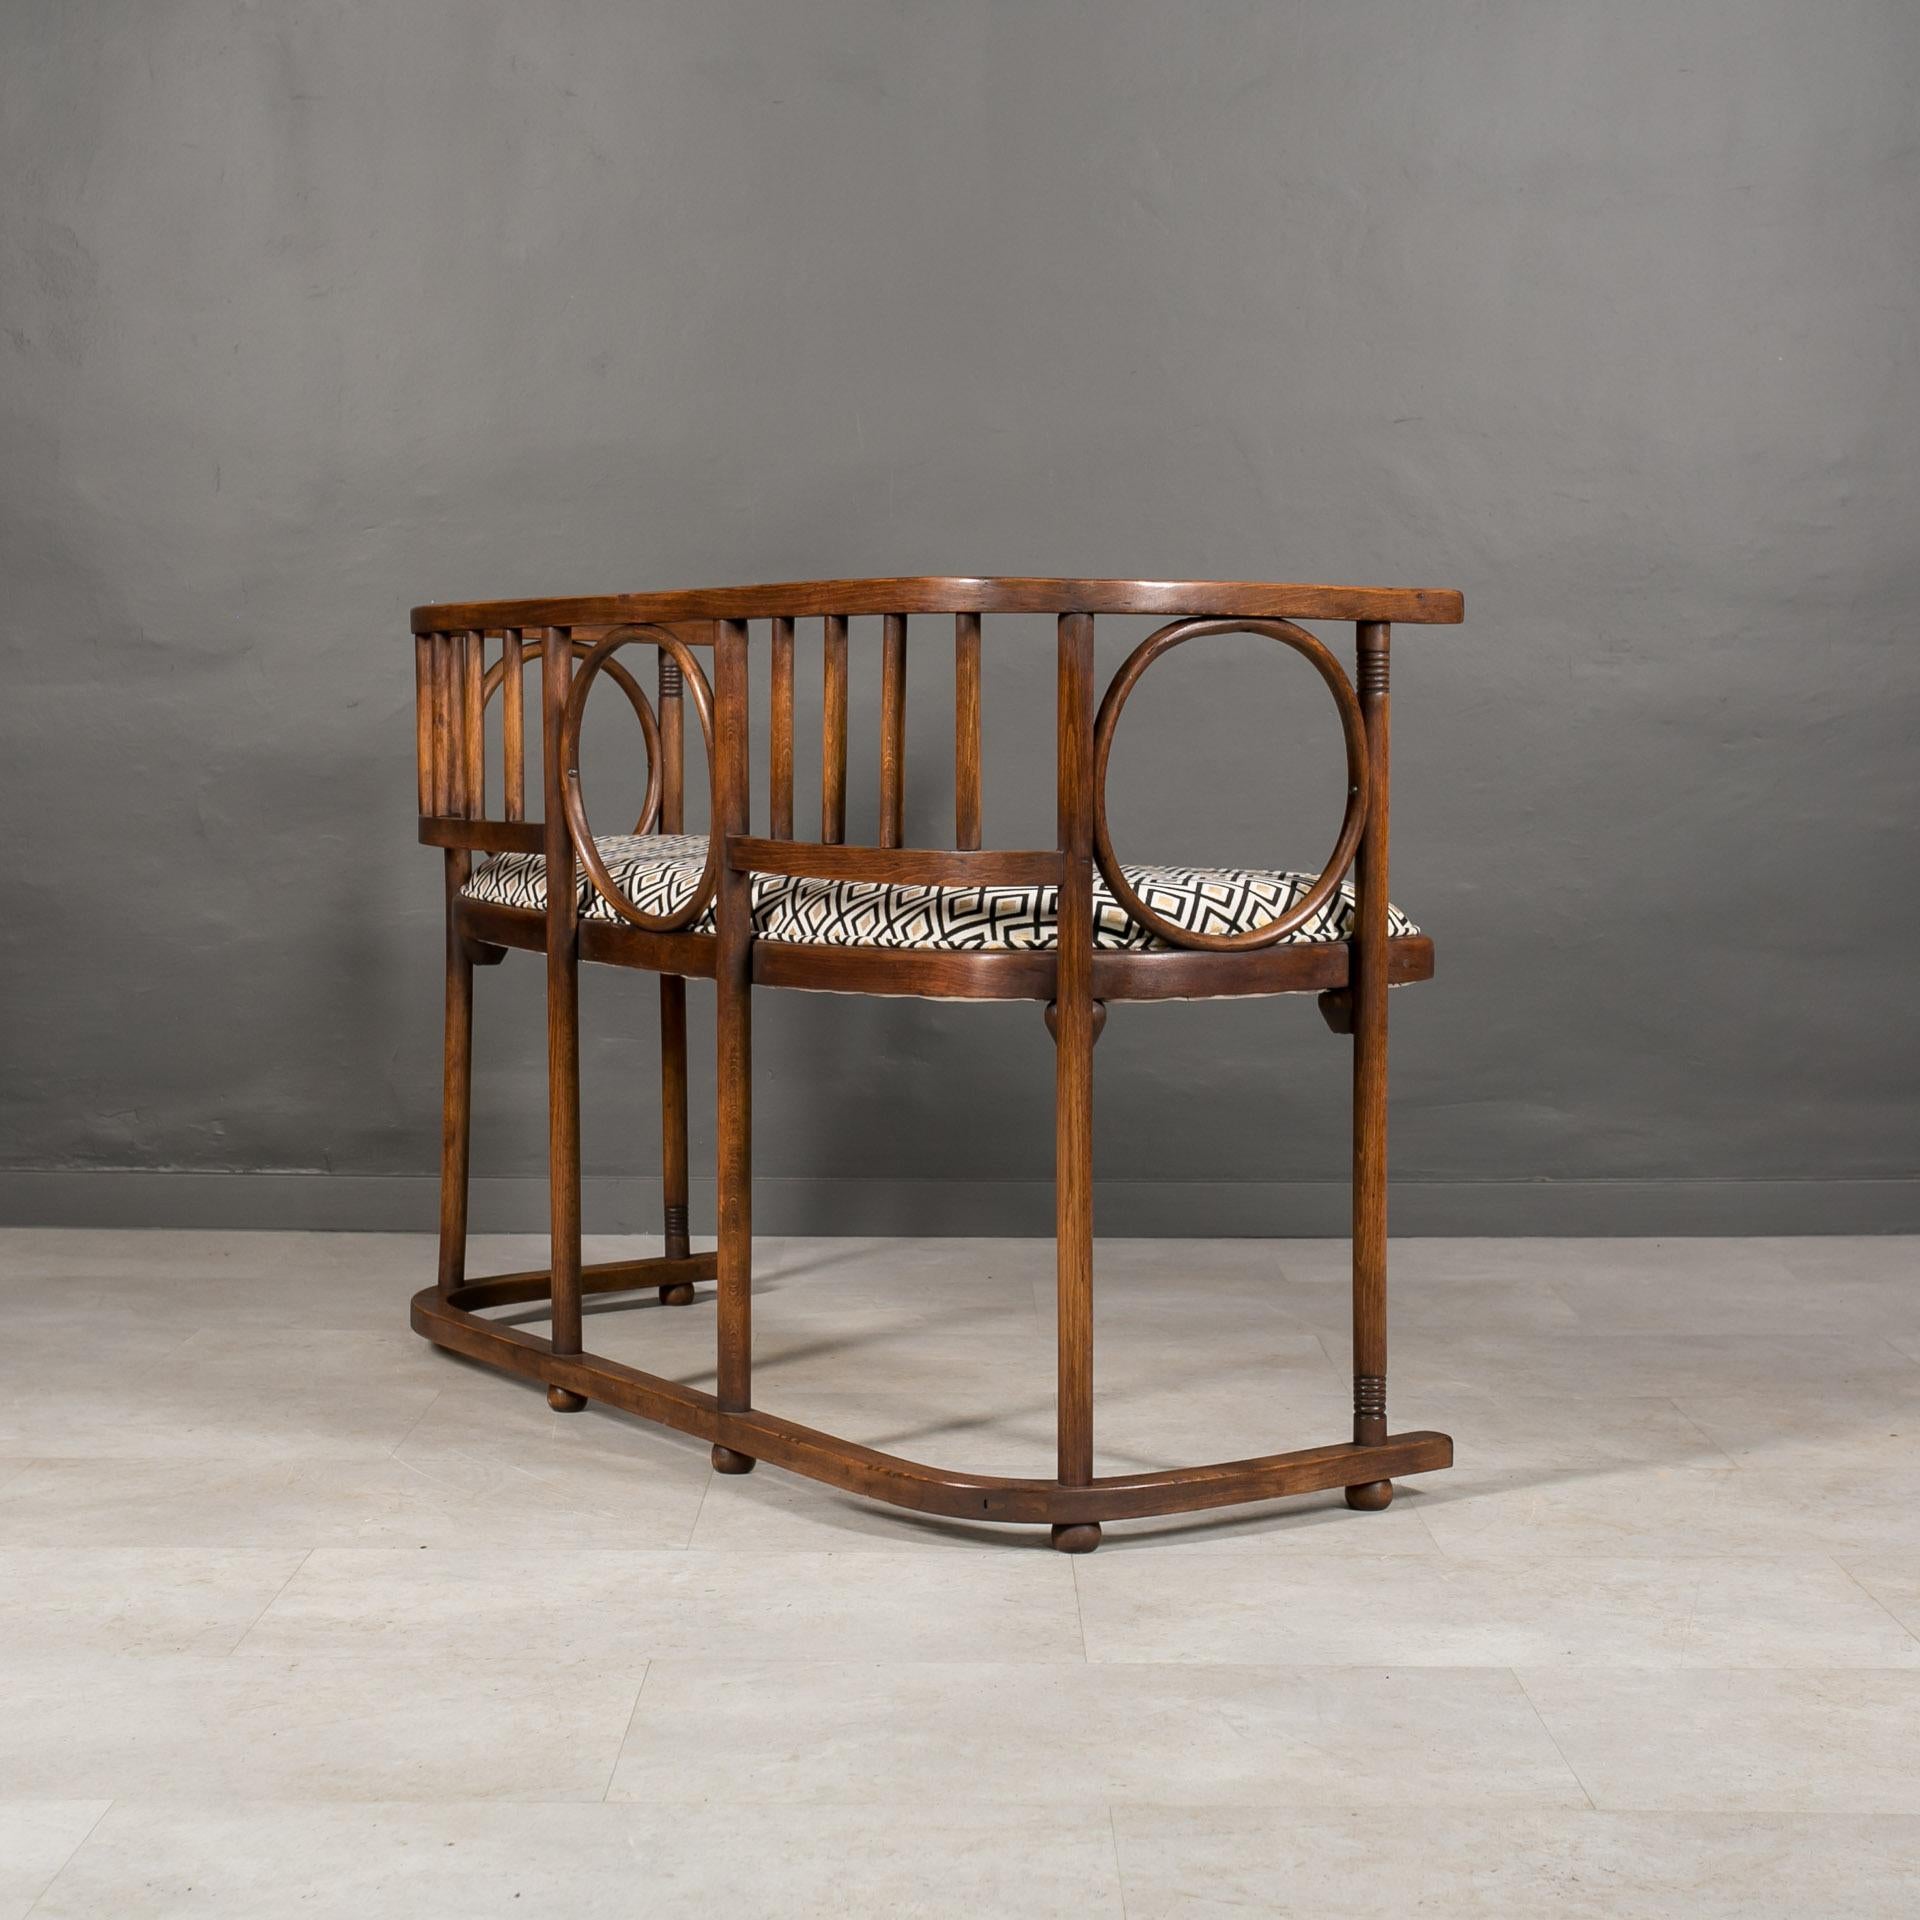 Early 20th Century Bentwood Bench Settee by J. Hoffmann for Thonet - Mundus In Good Condition For Sale In Wrocław, Poland